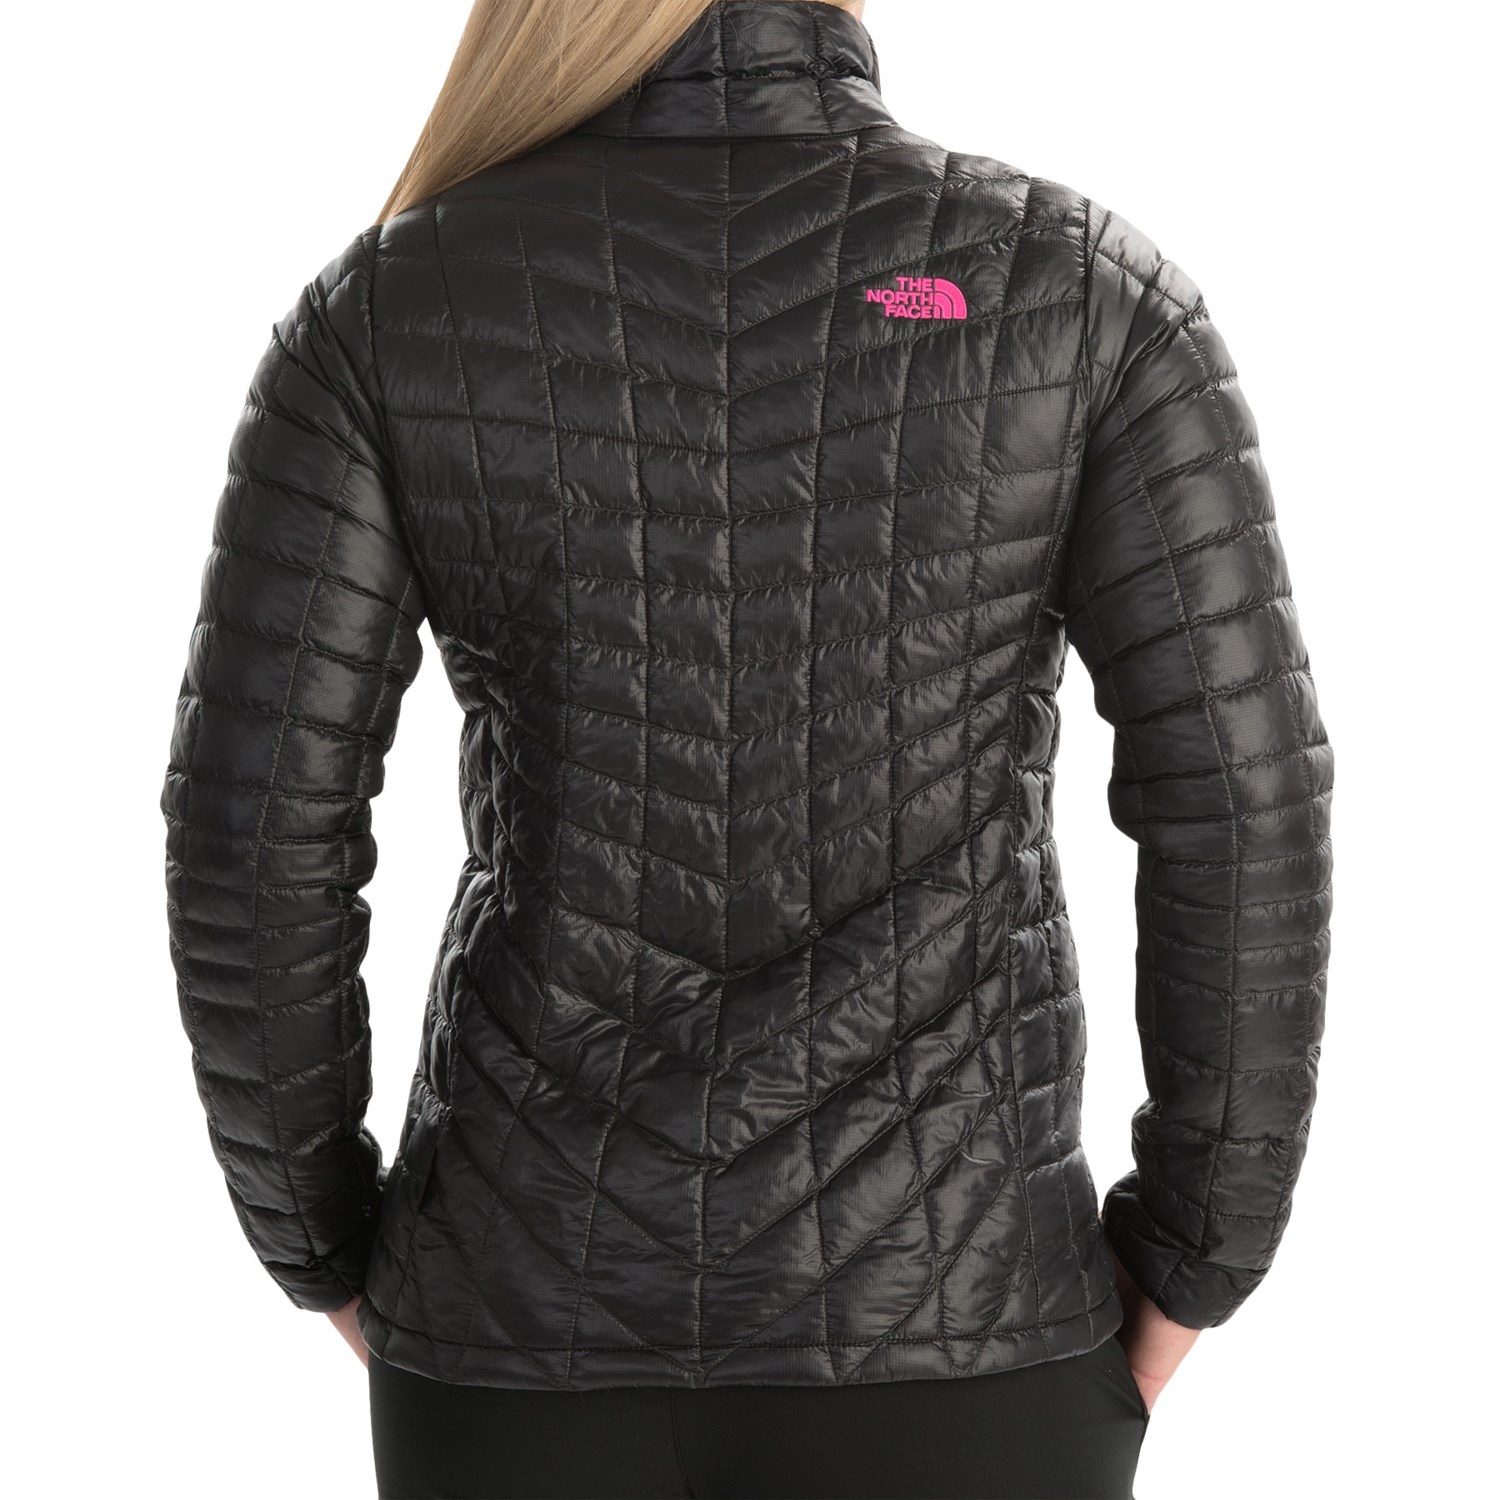 the north face women's 2xl jacket